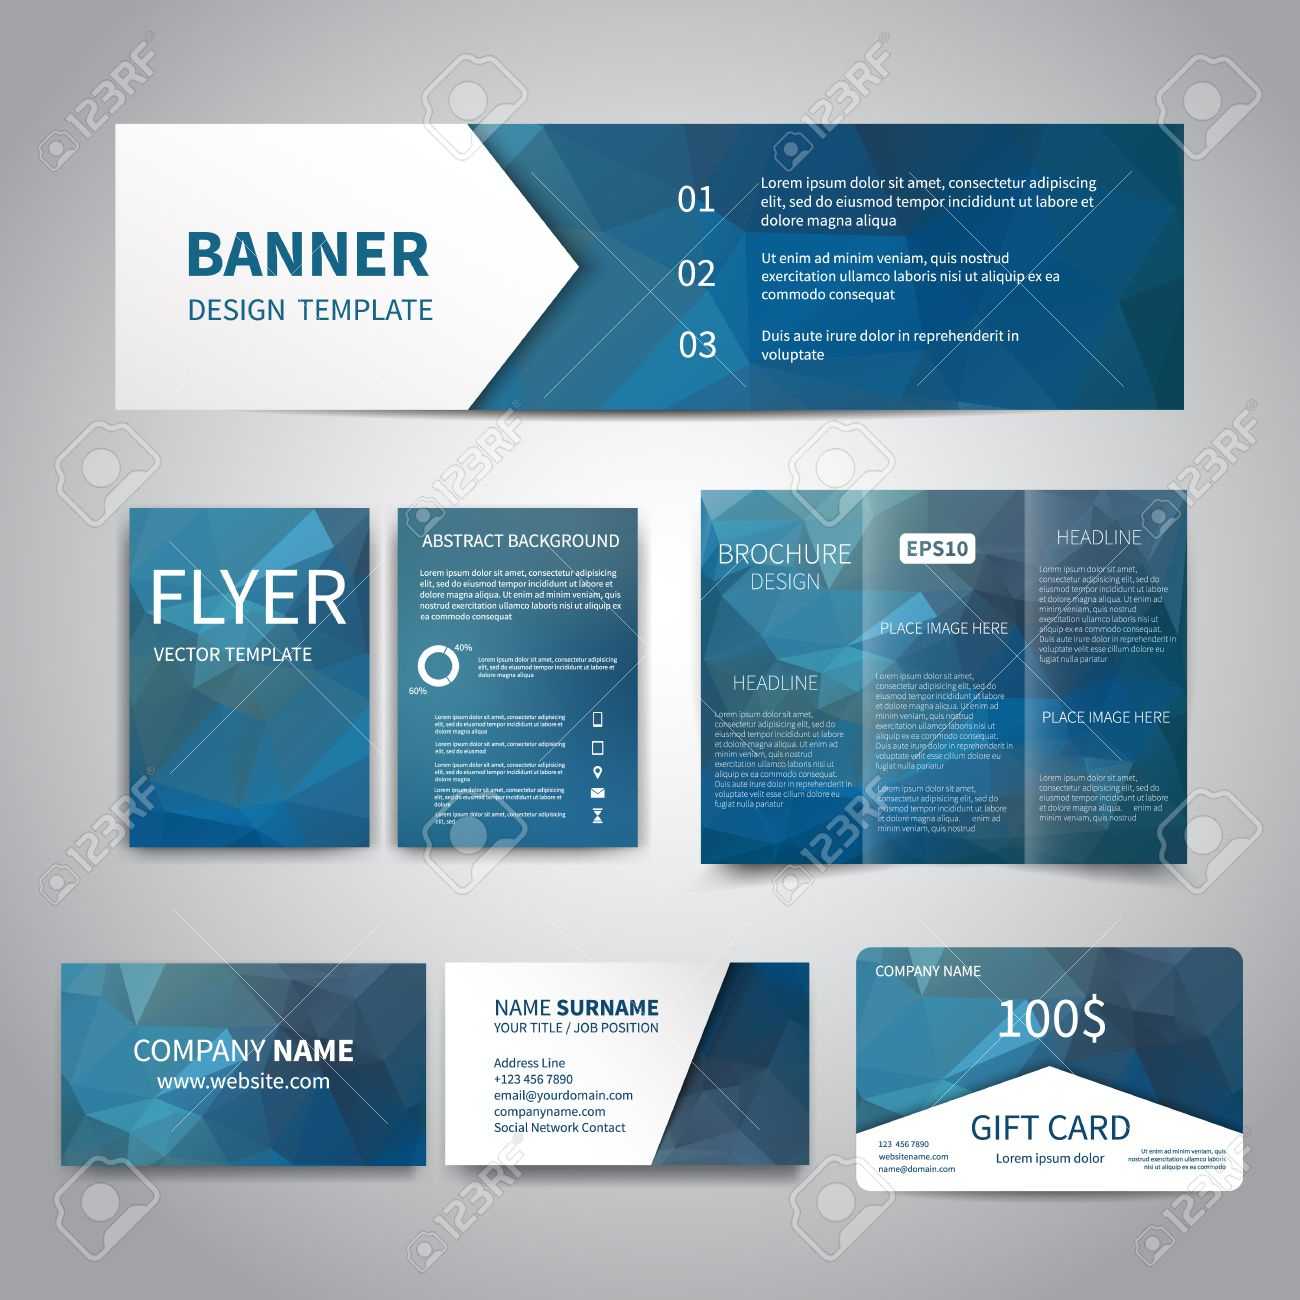 Advertising Cards Templates – Atlantaauctionco Pertaining To Advertising Cards Templates